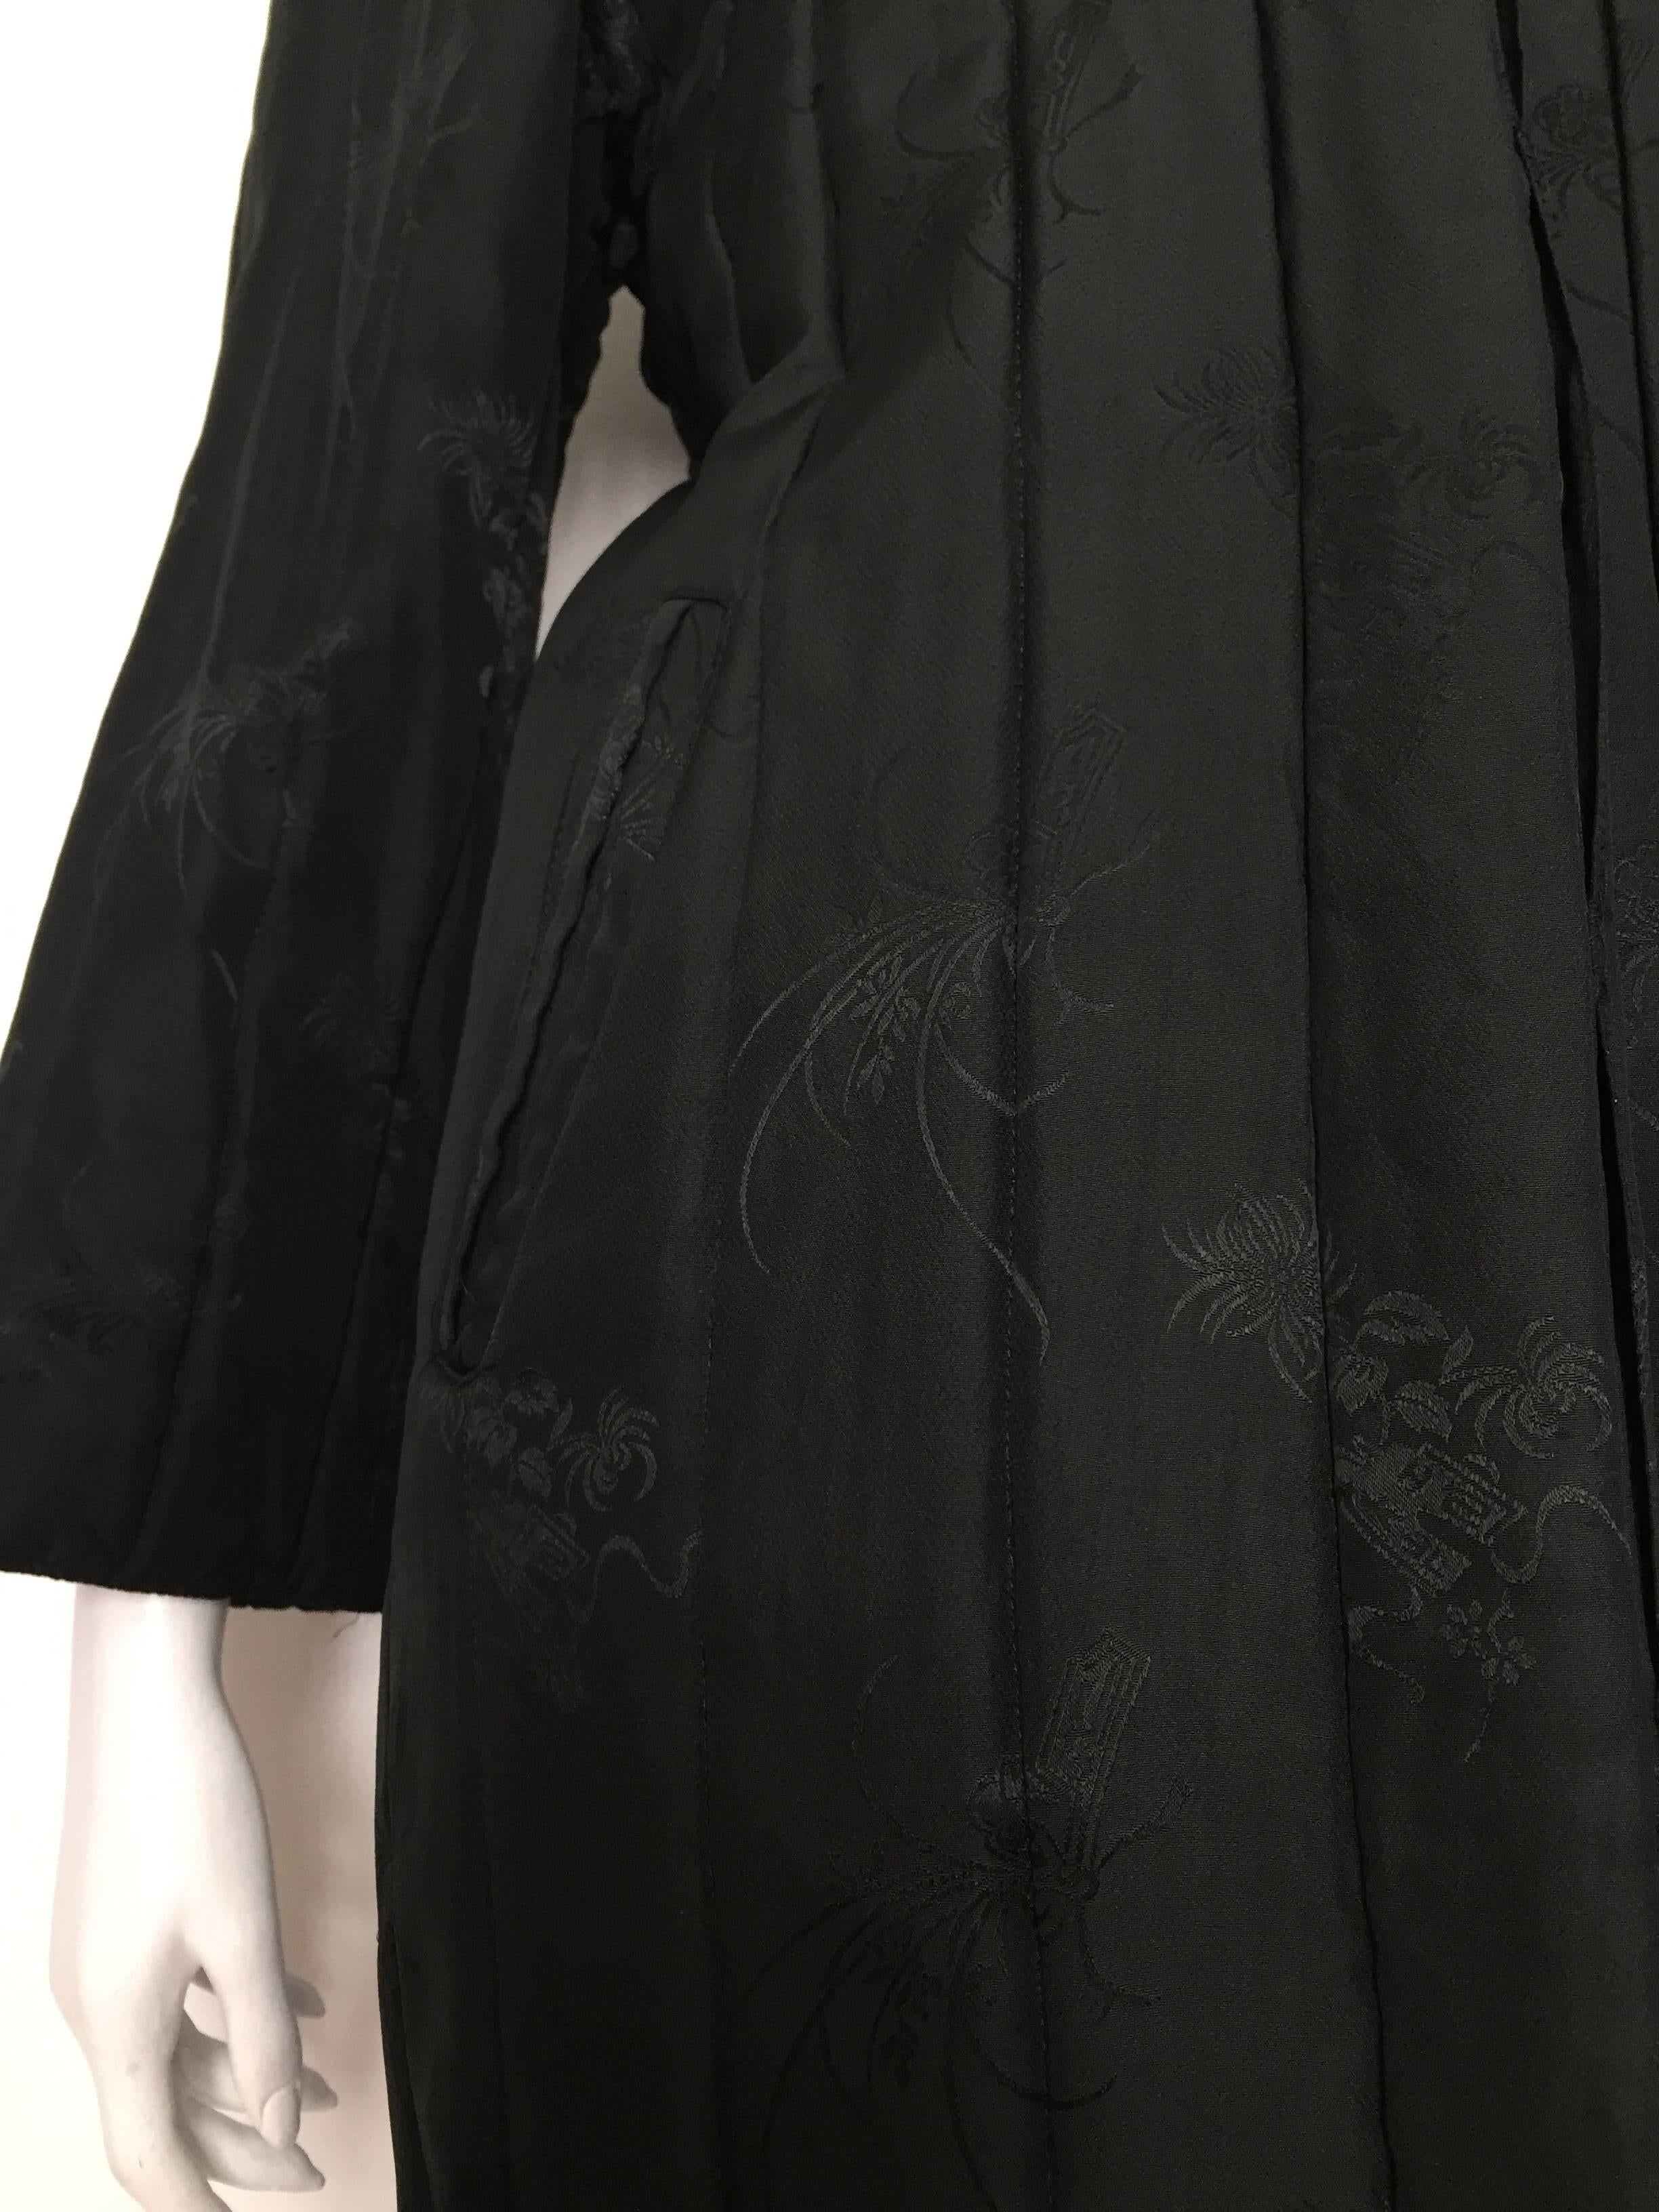 Bergdorf Goodman 1980s black silk, with lovely Asian pattern, long quilted coat that will fit a USA size 6 - 8 but please see the measurements below so you can properly measure your body to make certain this will fit your body. 
Measurements